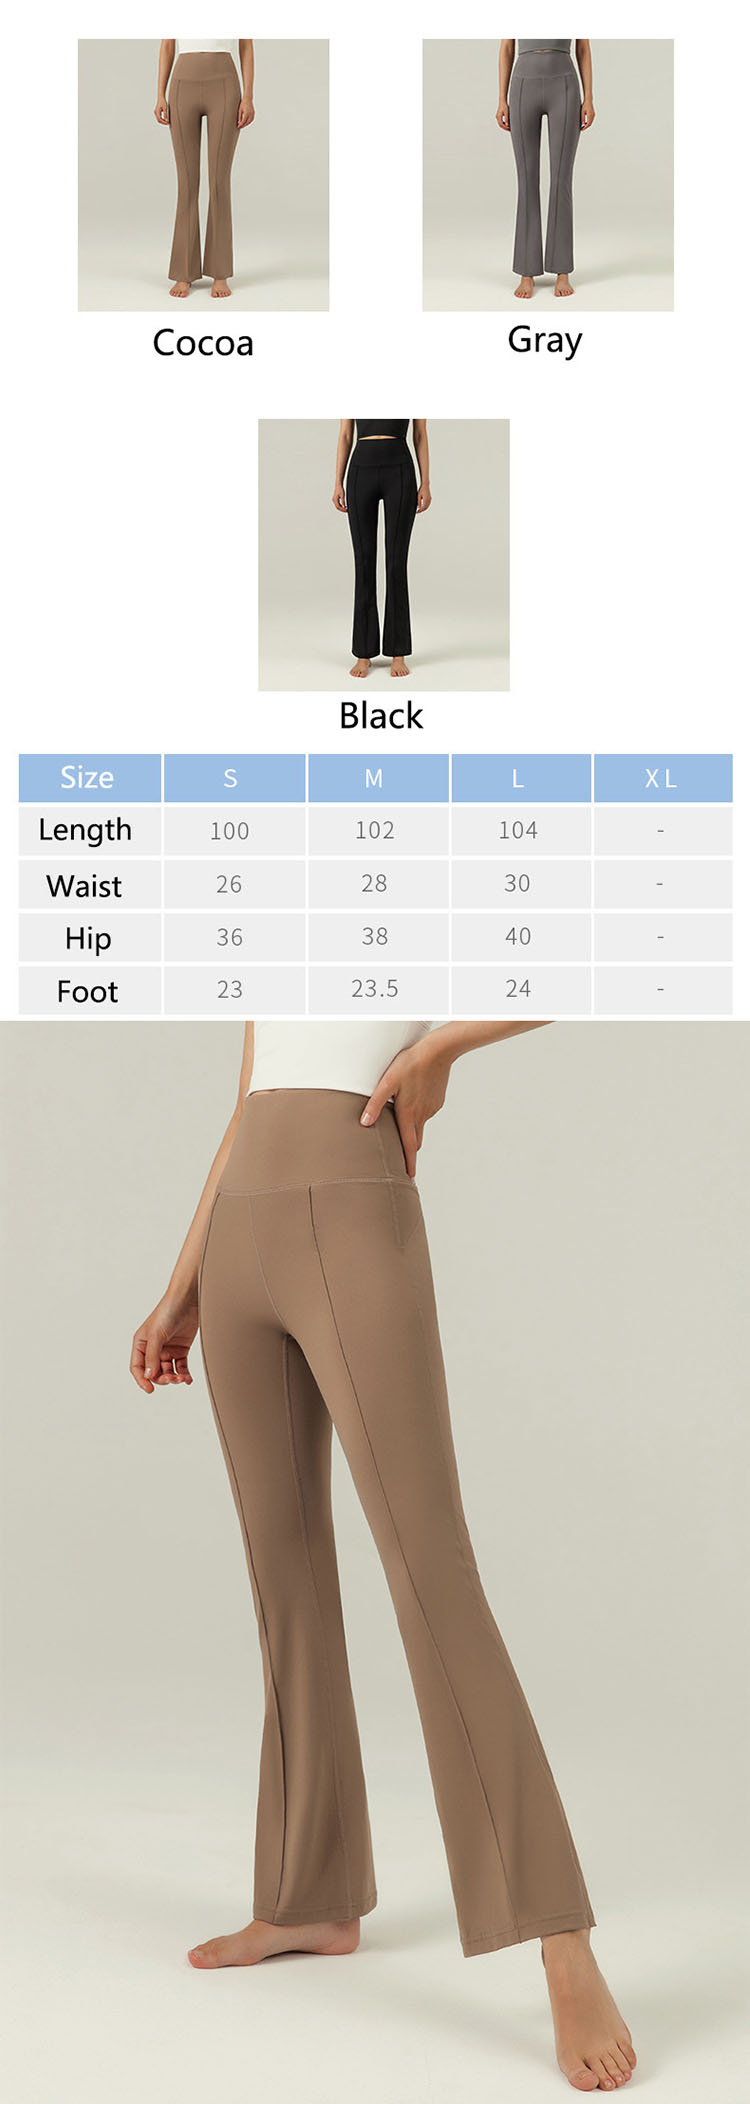 The buttocks are designed with a raised hip, which is simple and stylish